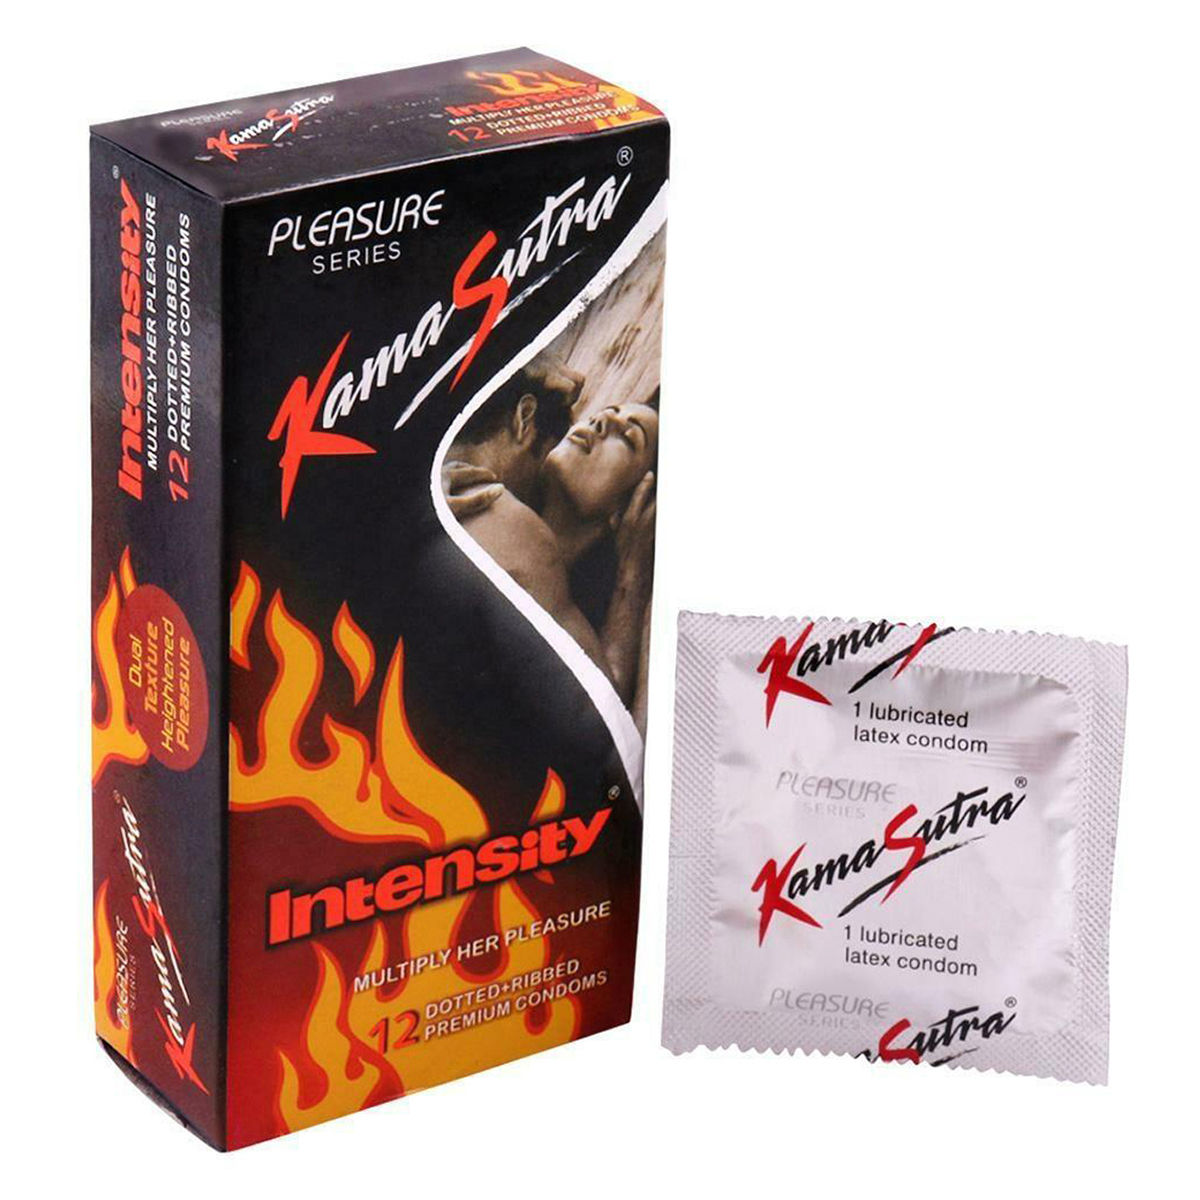 Buy Kamasutra Intensity Dotted + Ribbed Premium Condom, 12 Count Online